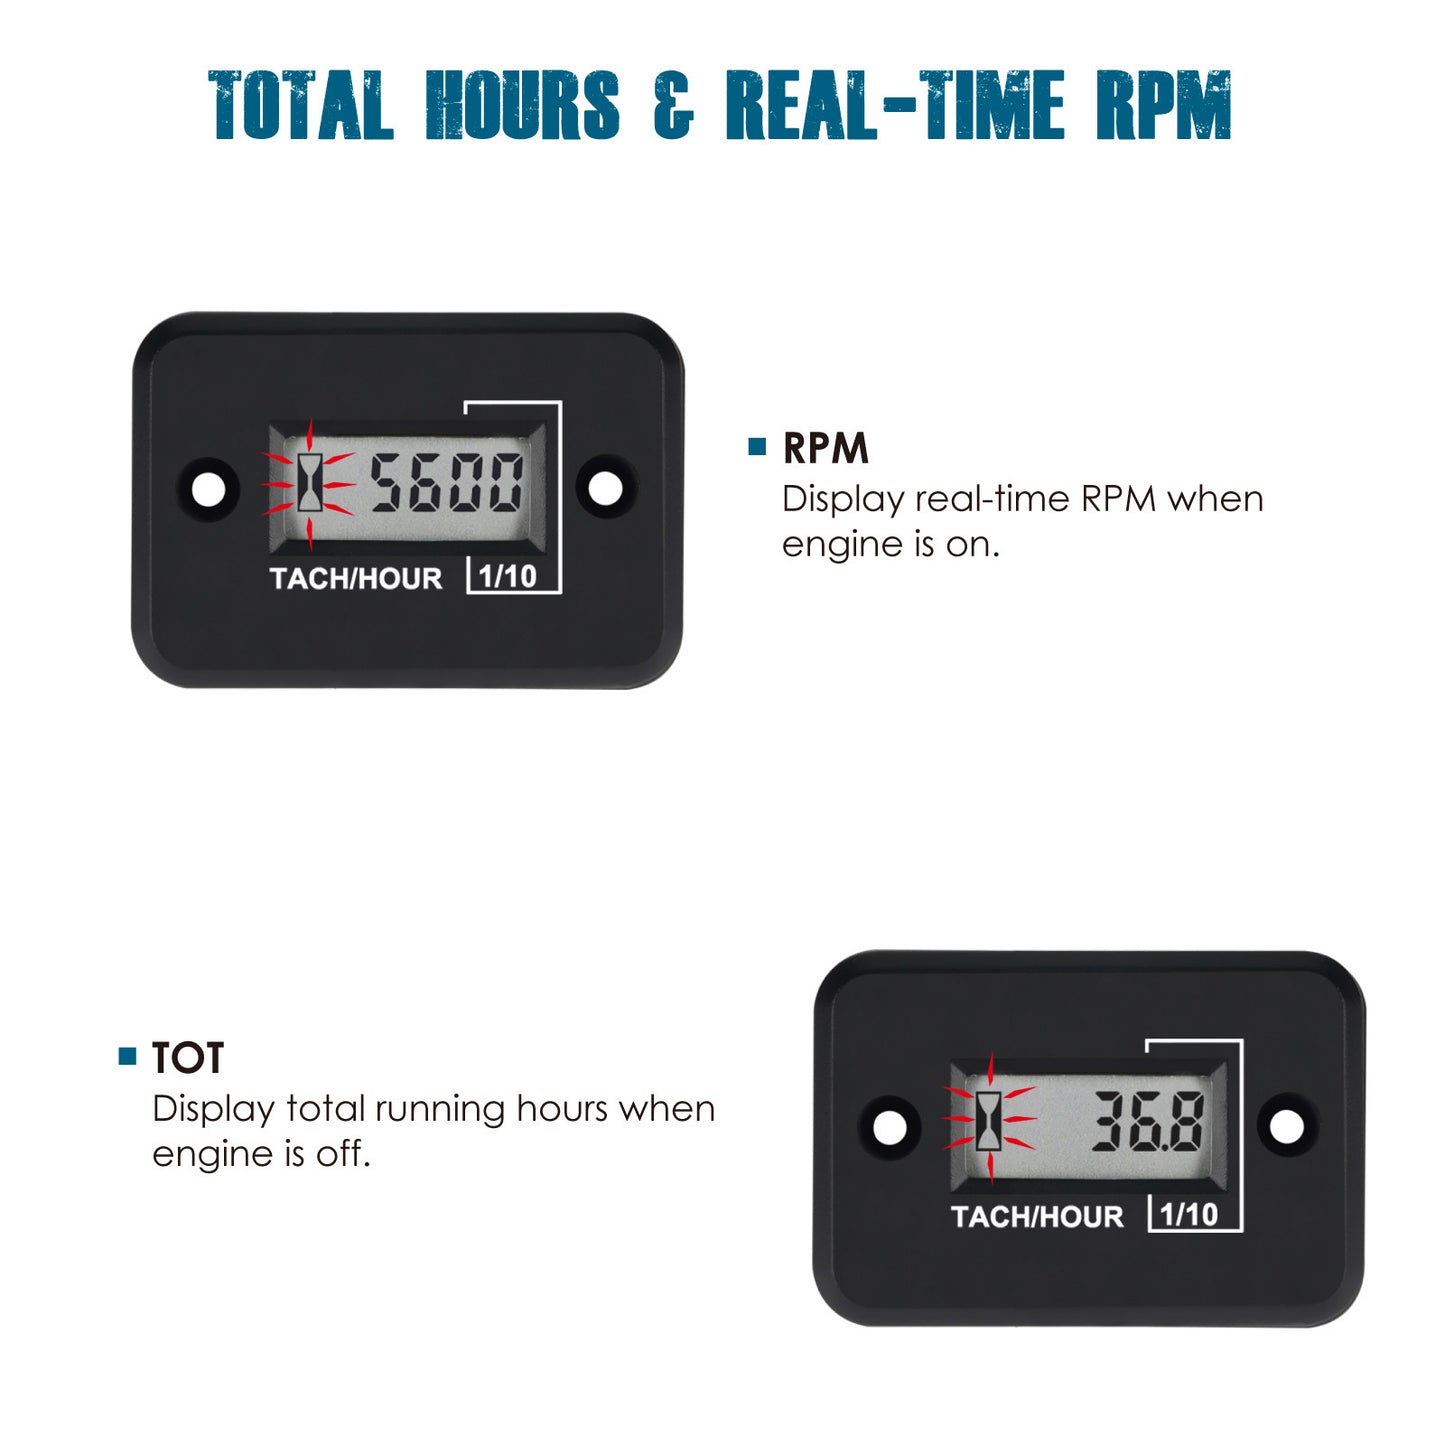 Runleader Digital Mini Tach Hour Meter, TOT Hours Accumulate, Real-time RPM Display, Battery Operation for ZTR Lawn Mower Tractor Generator